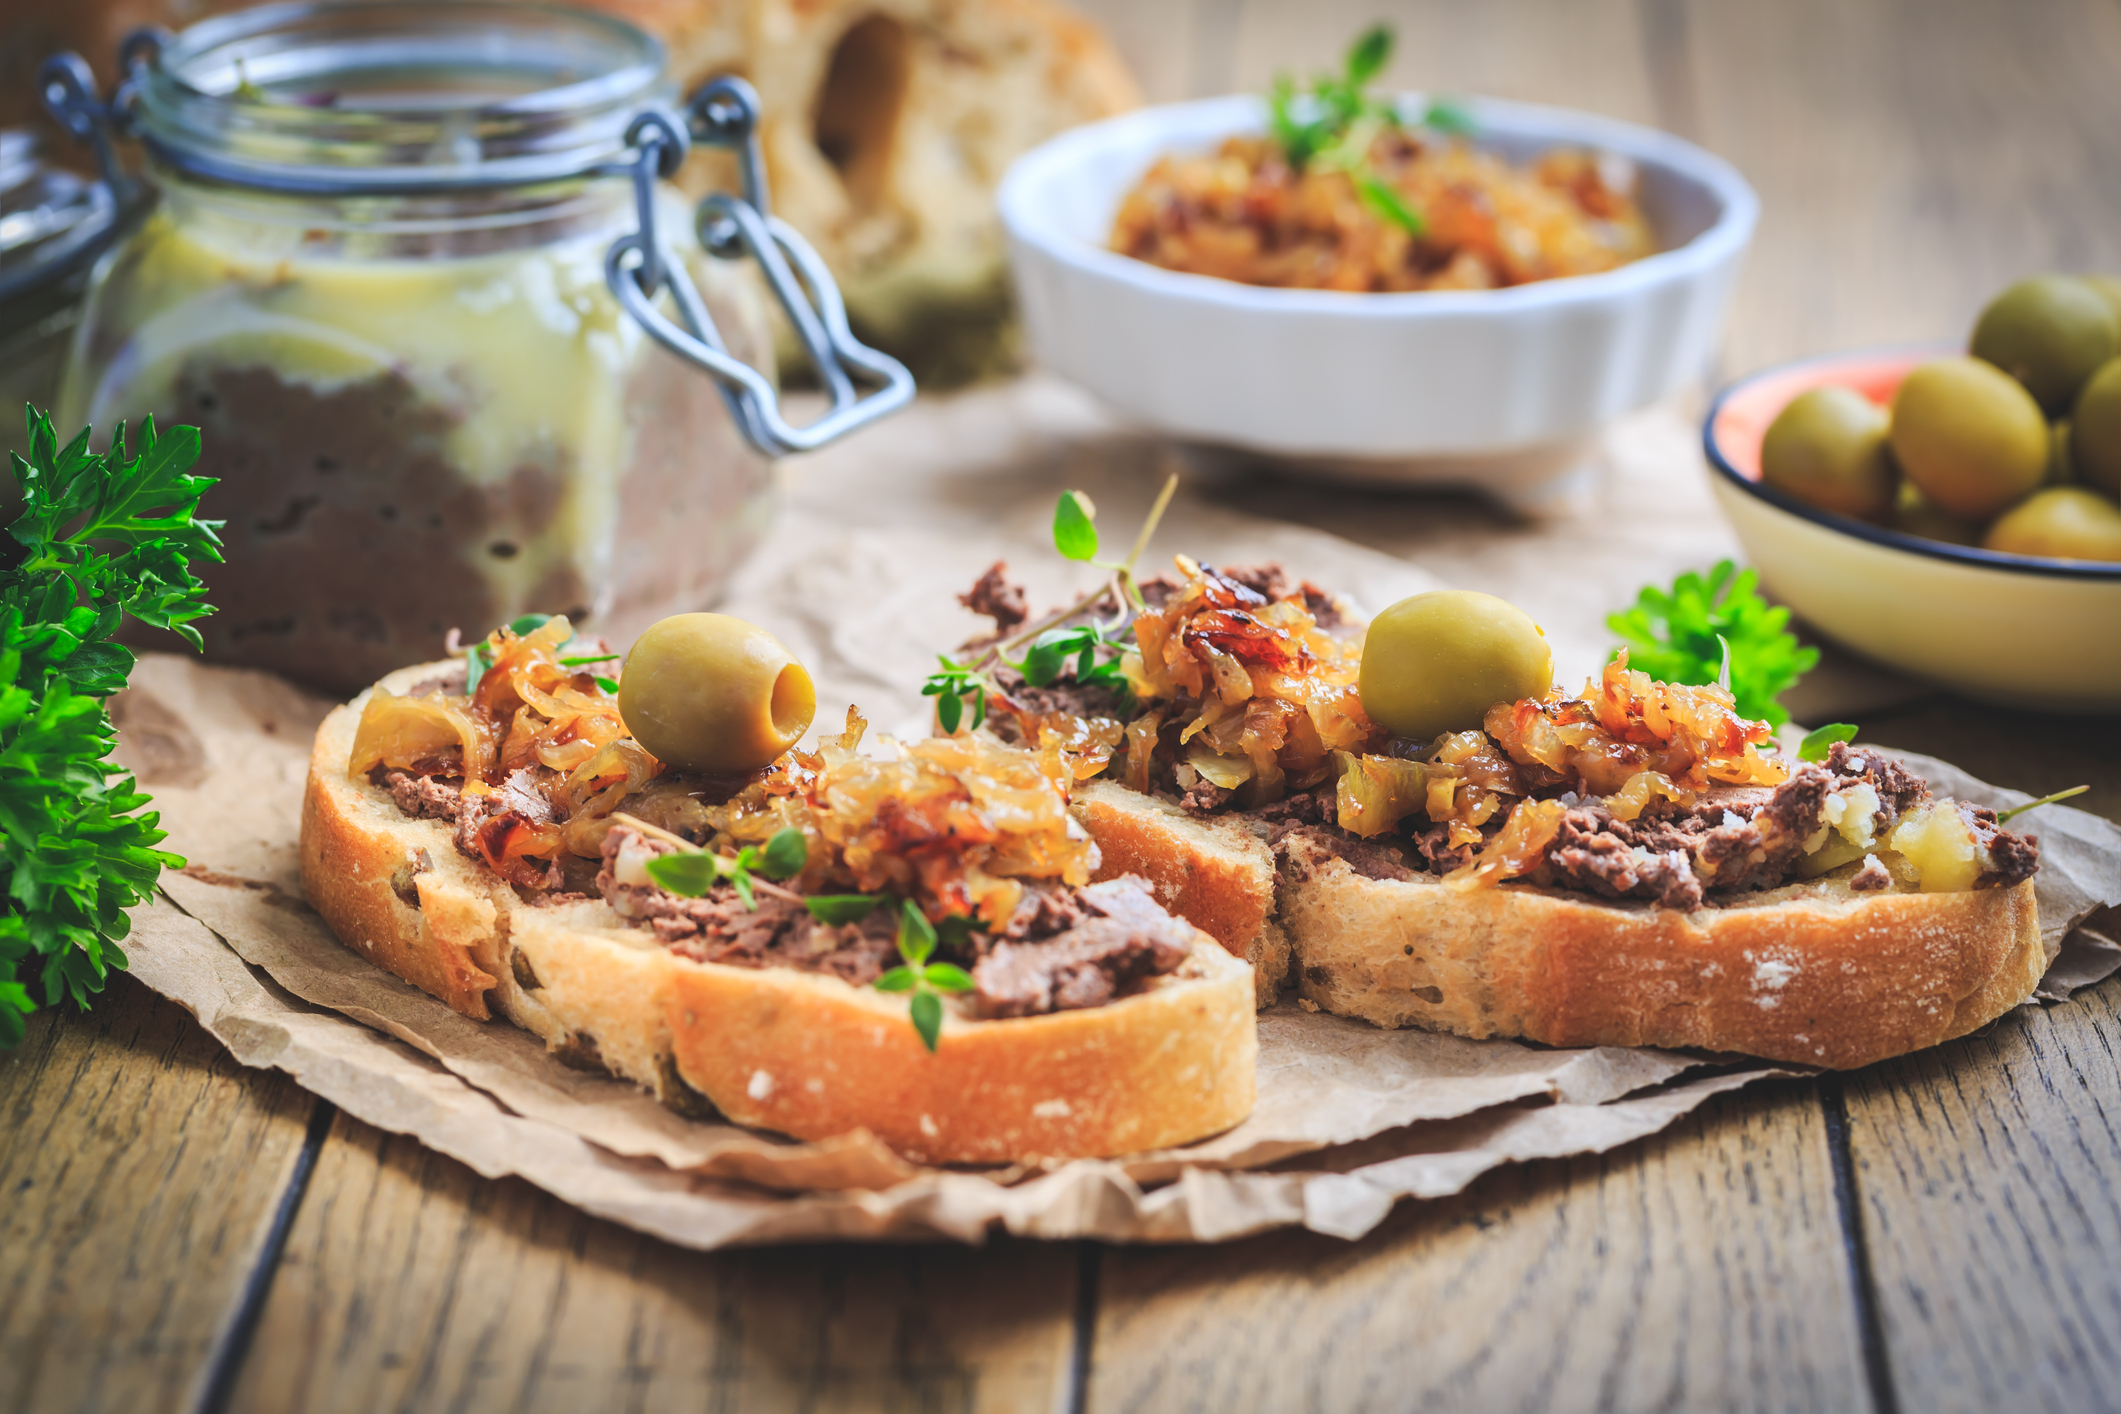 Fresh koji, plant-based pate on ciabatta bread with roasted onions and olives on wooden table